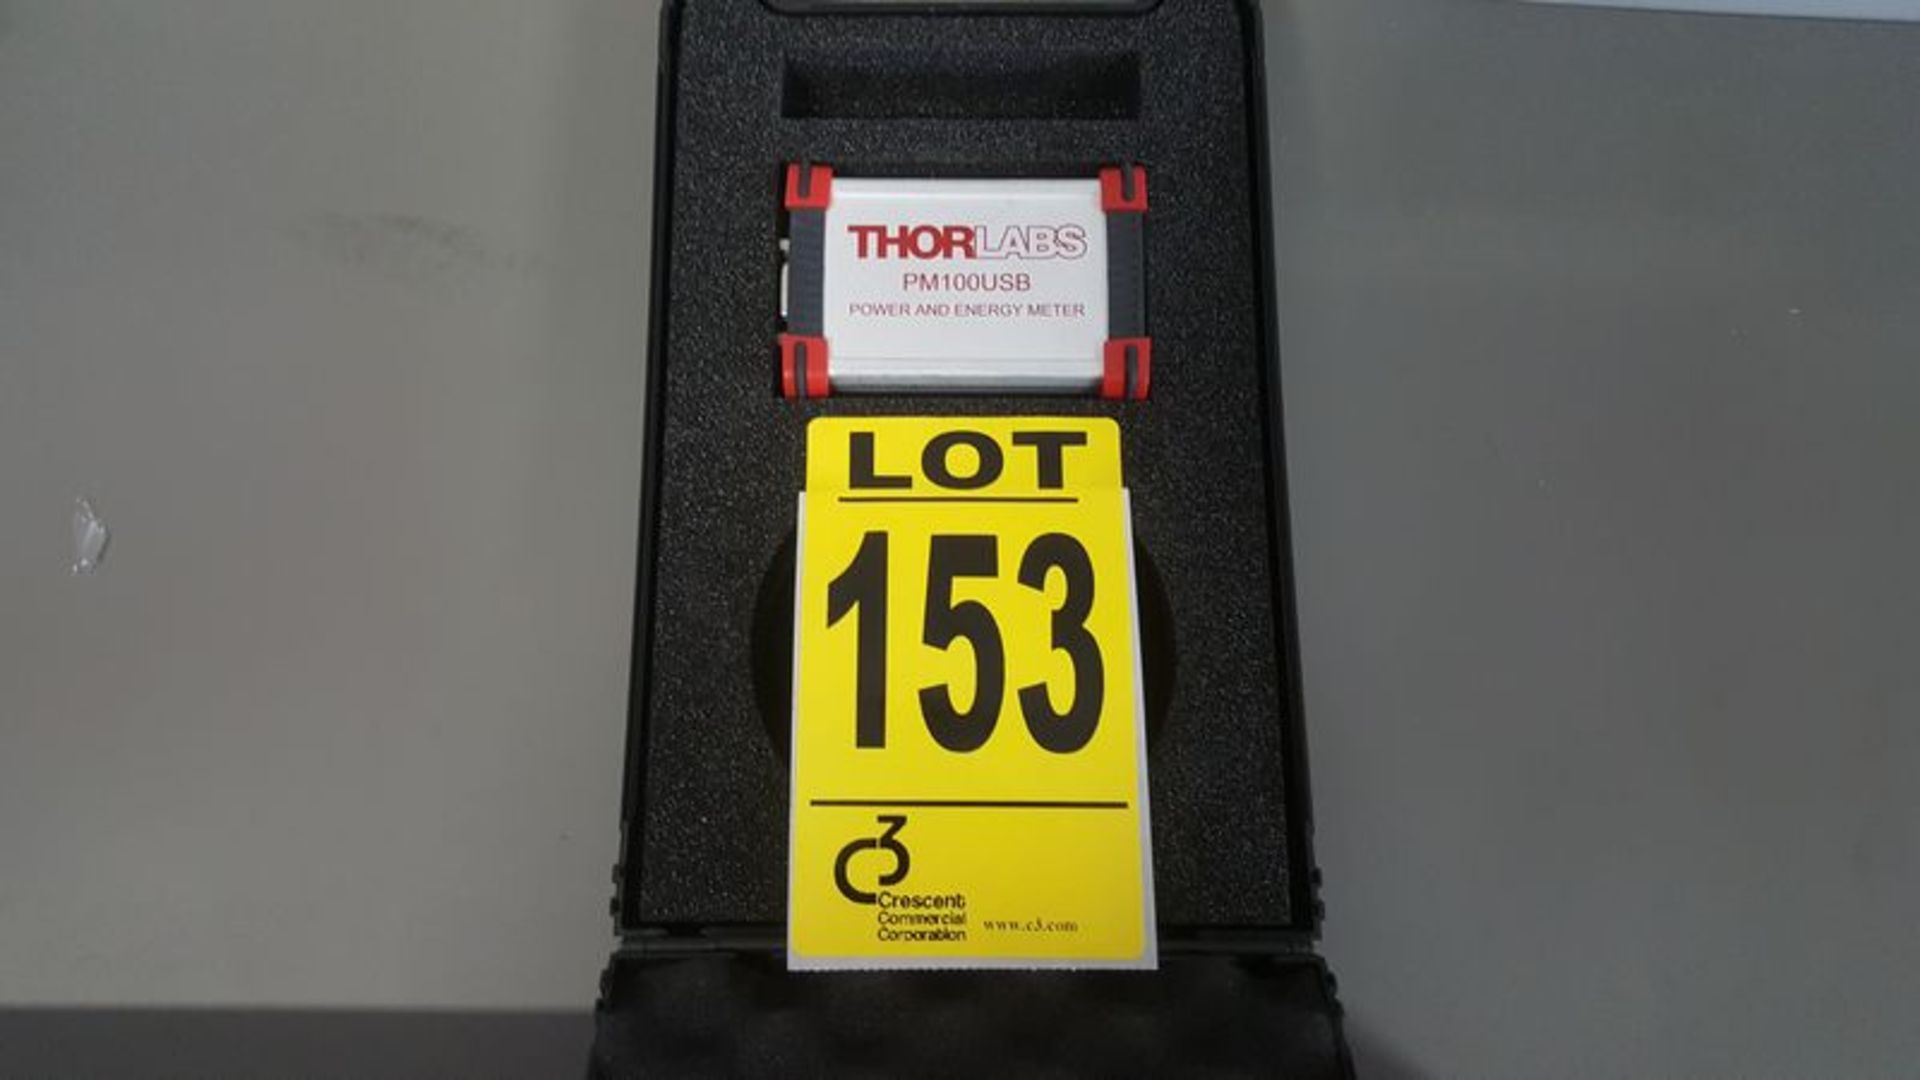 Thorlabs DMD1000USB power and energy meter